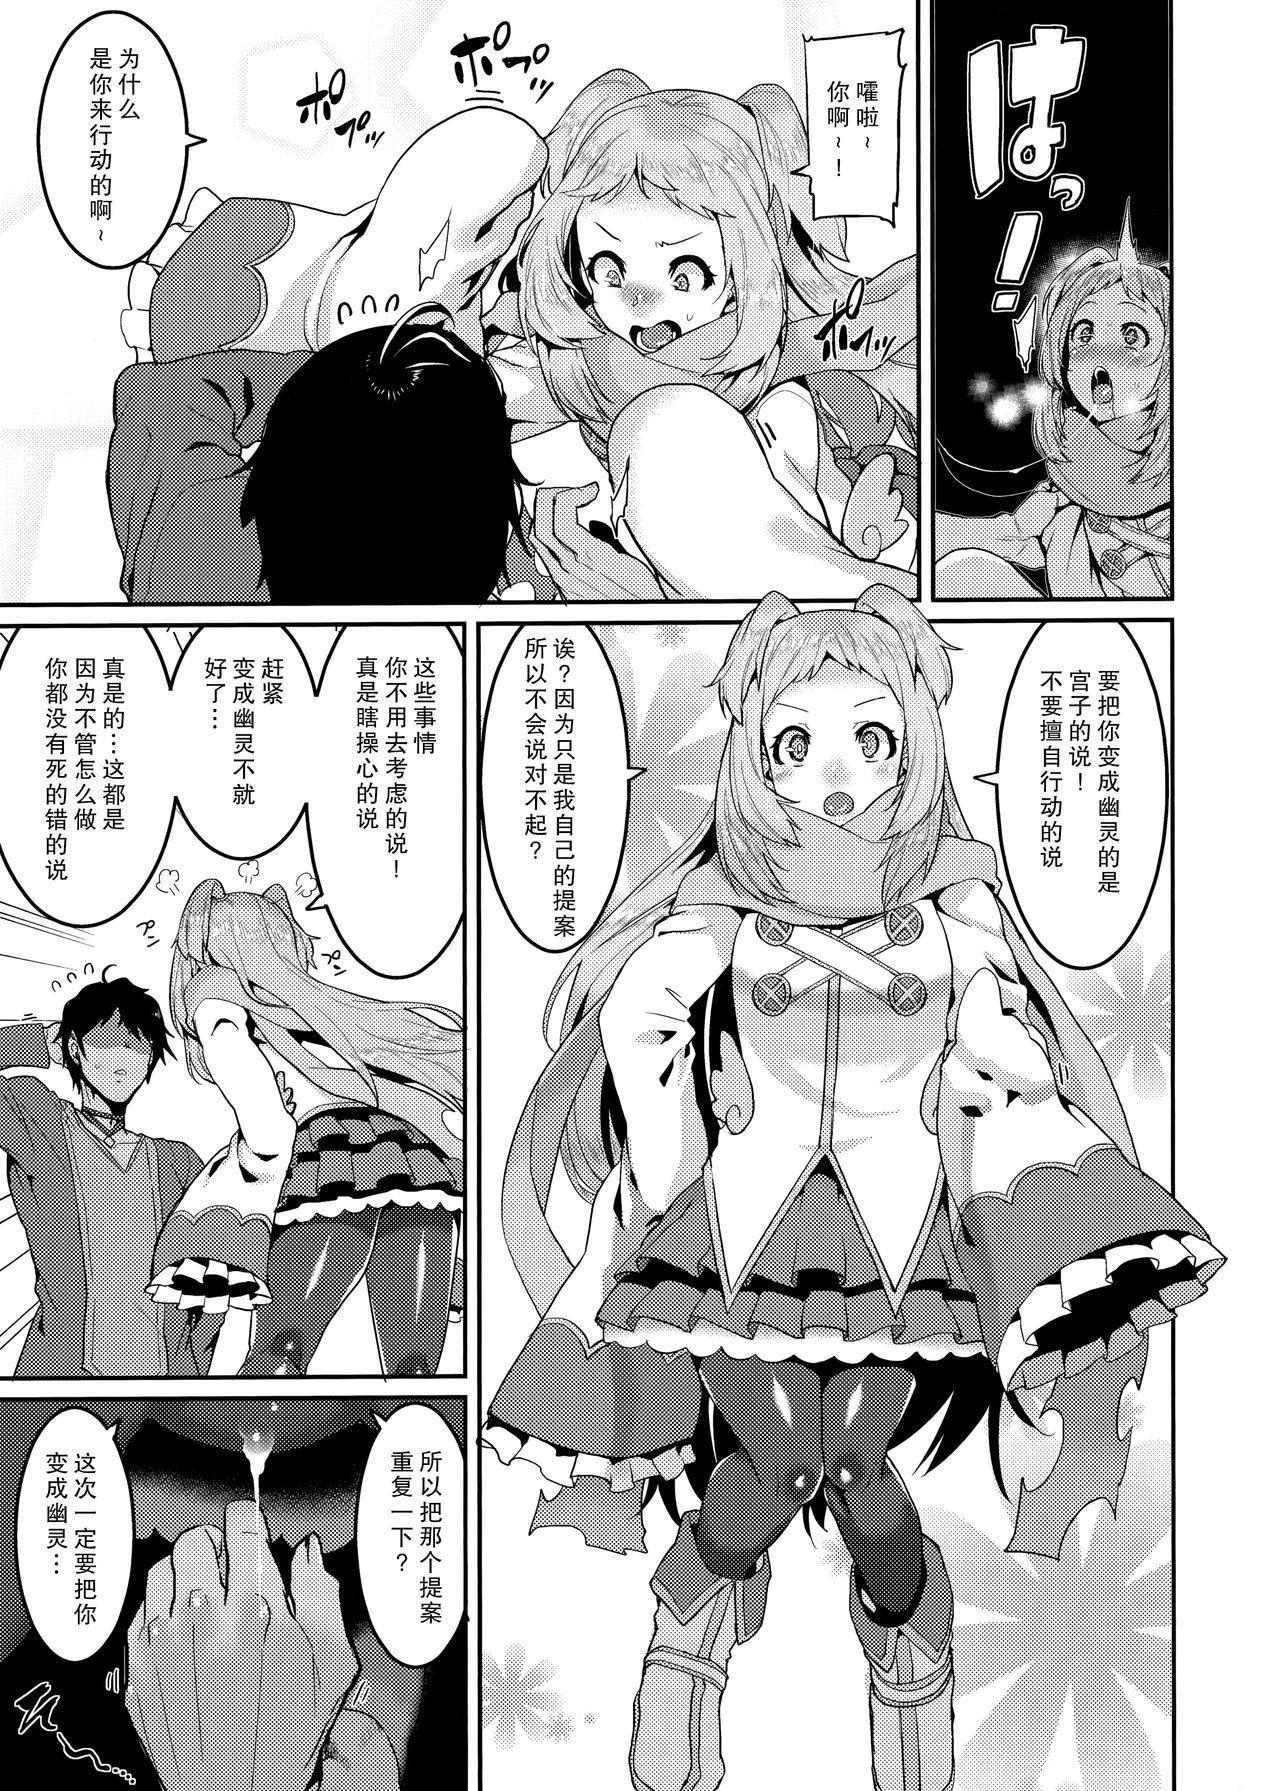 Amatoriale (C96) [HBO (Henkuma)] Pudding Switch (Princess Connect! Re:Dive) [Chinese] 【零食汉化组】 - Princess connect Tribute - Page 8